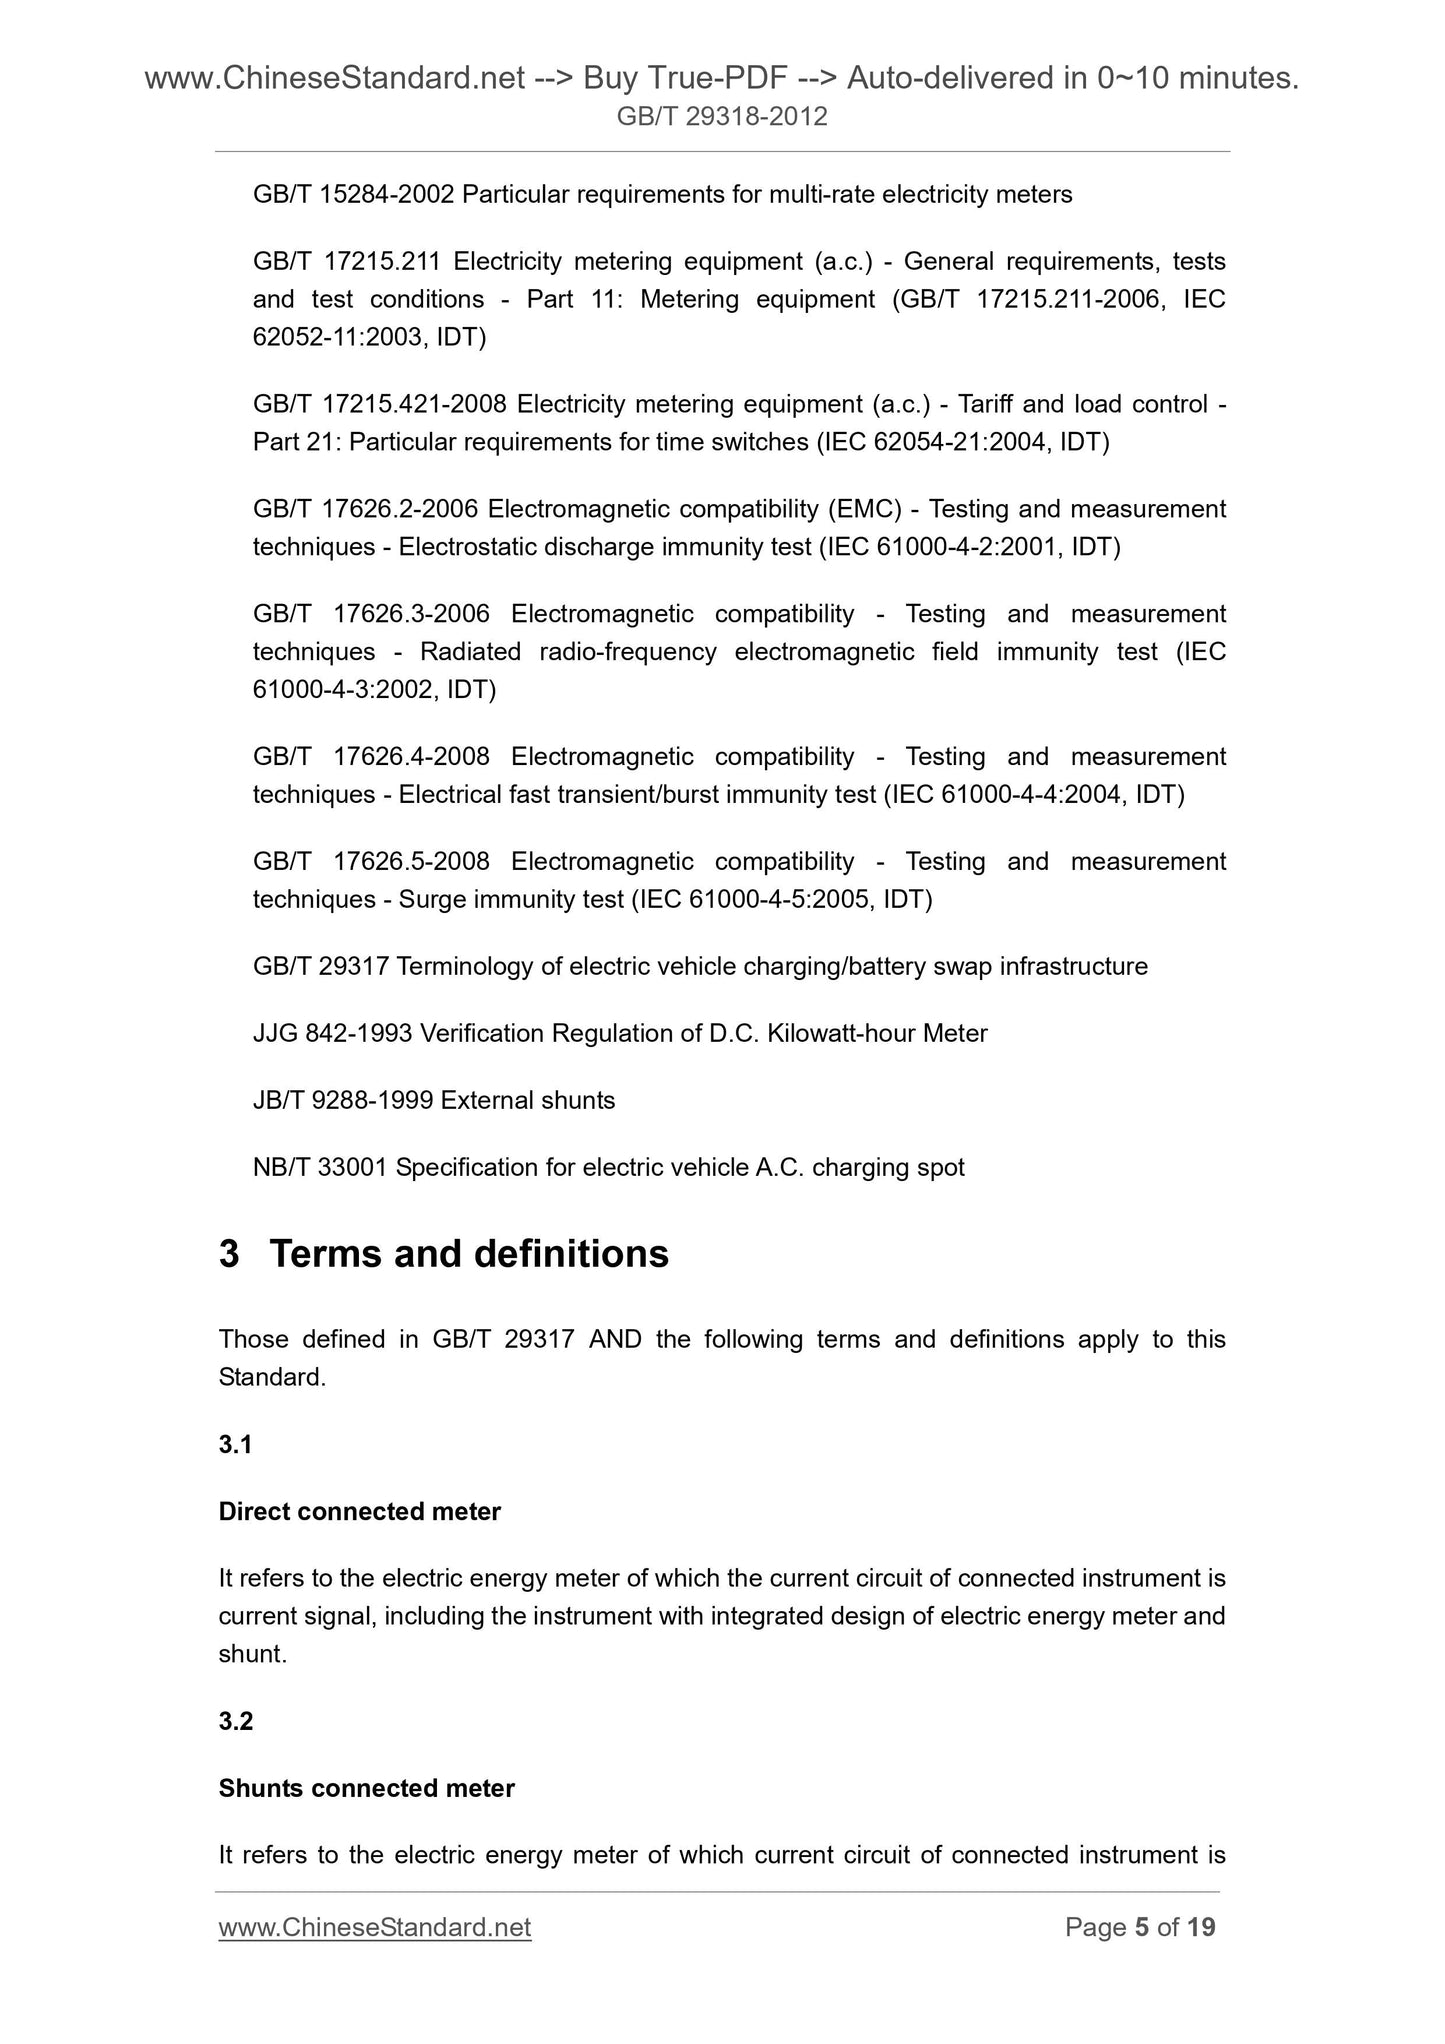 GB/T 29318-2012 Page 5